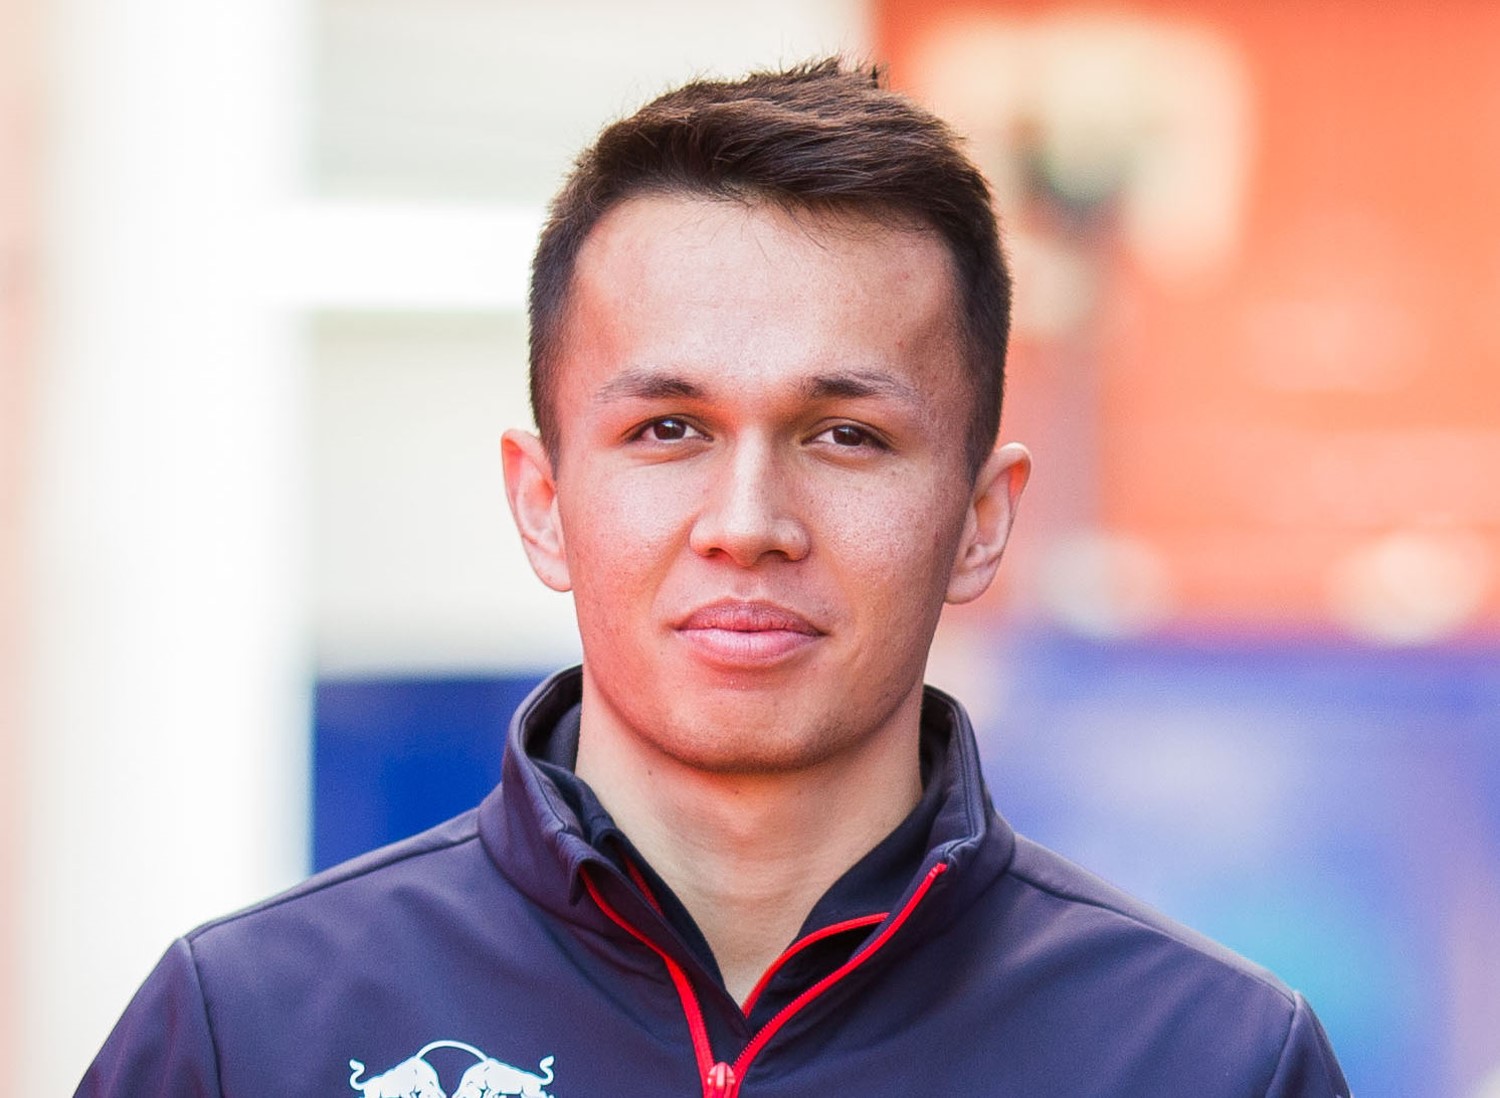 It's too soon to pit young Albon against Verstappen. Will Verstappen destroy his career too?